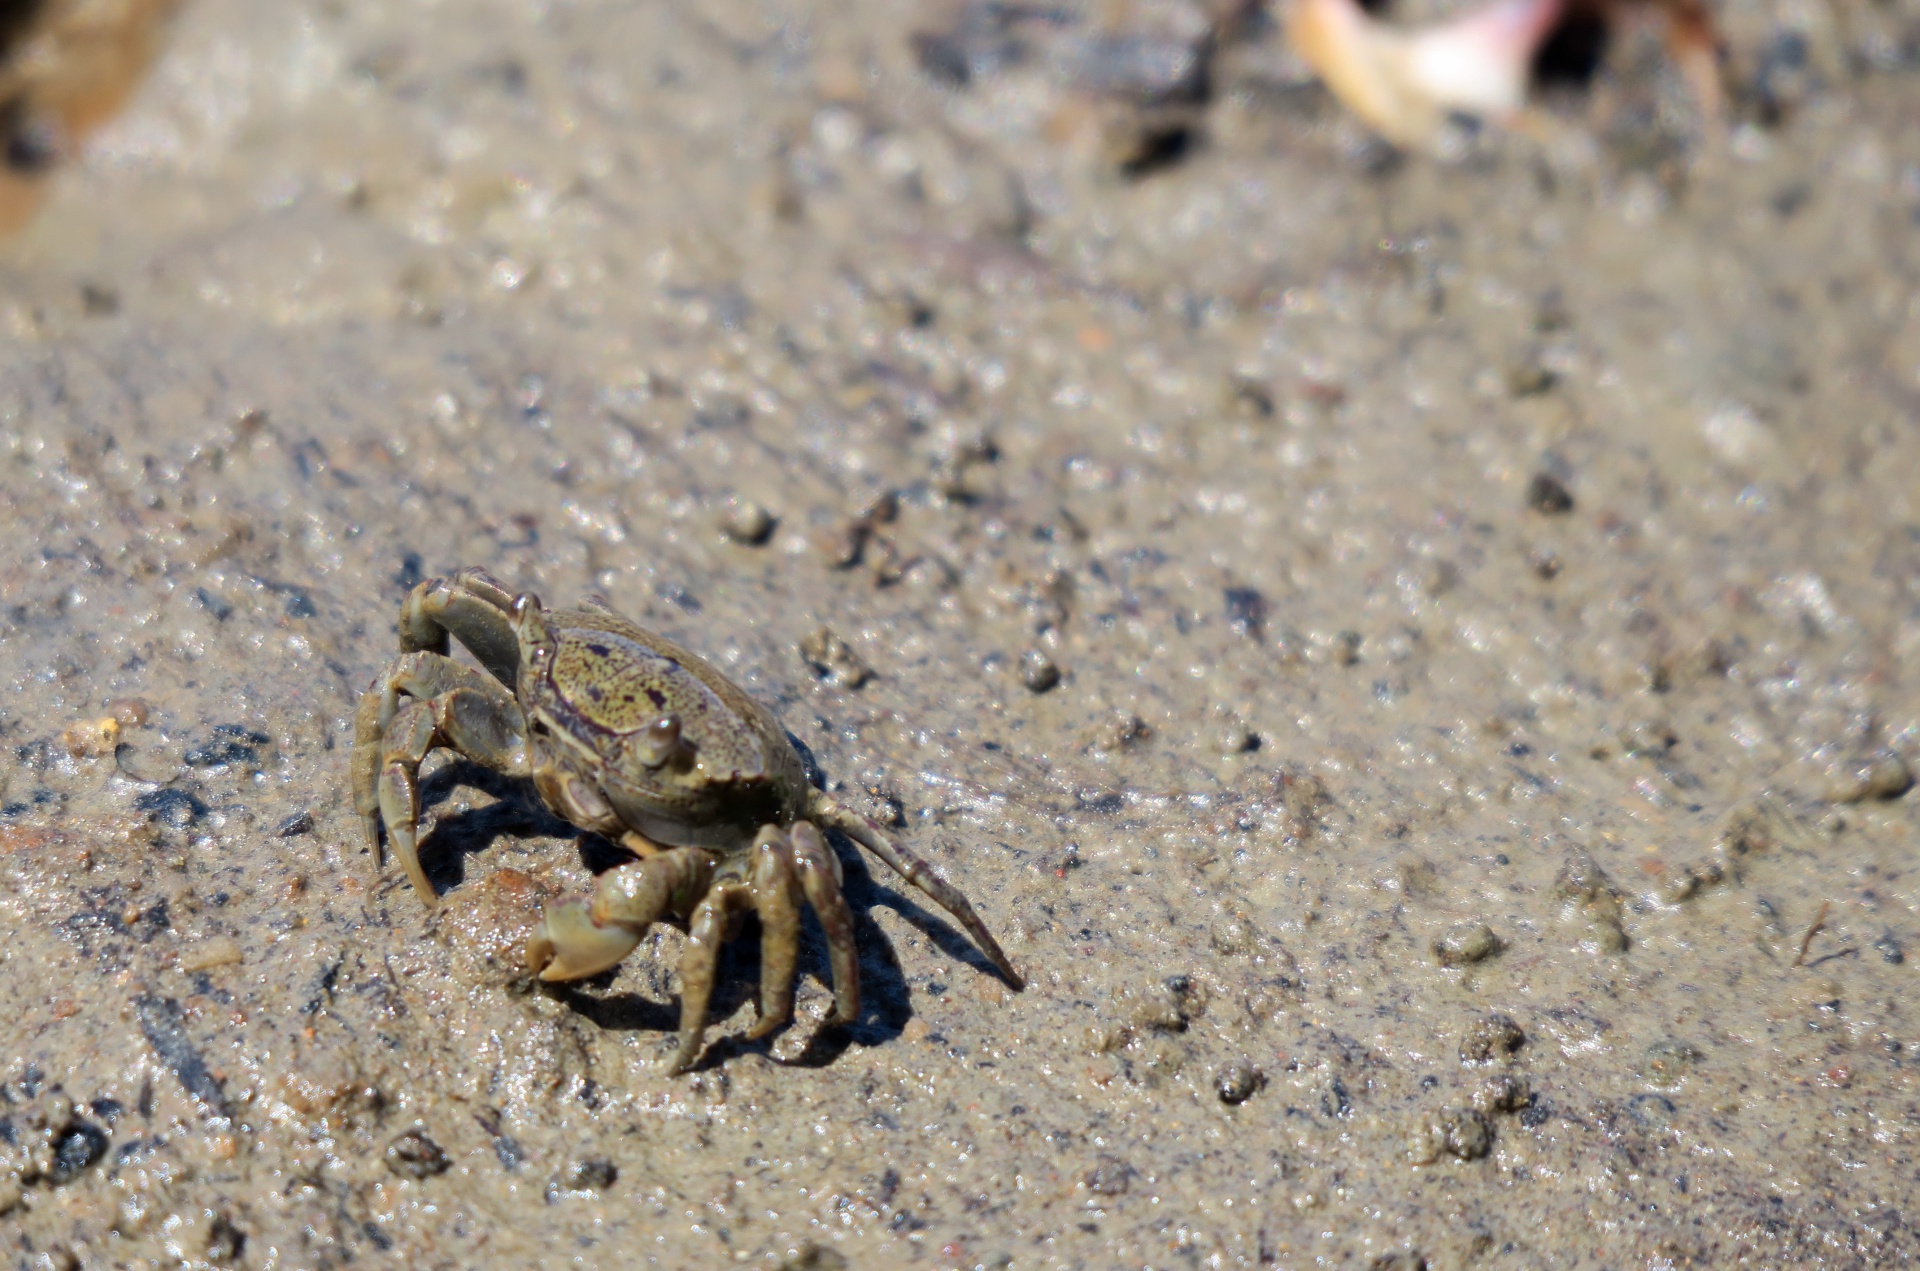 This crab was the size of a quarter!